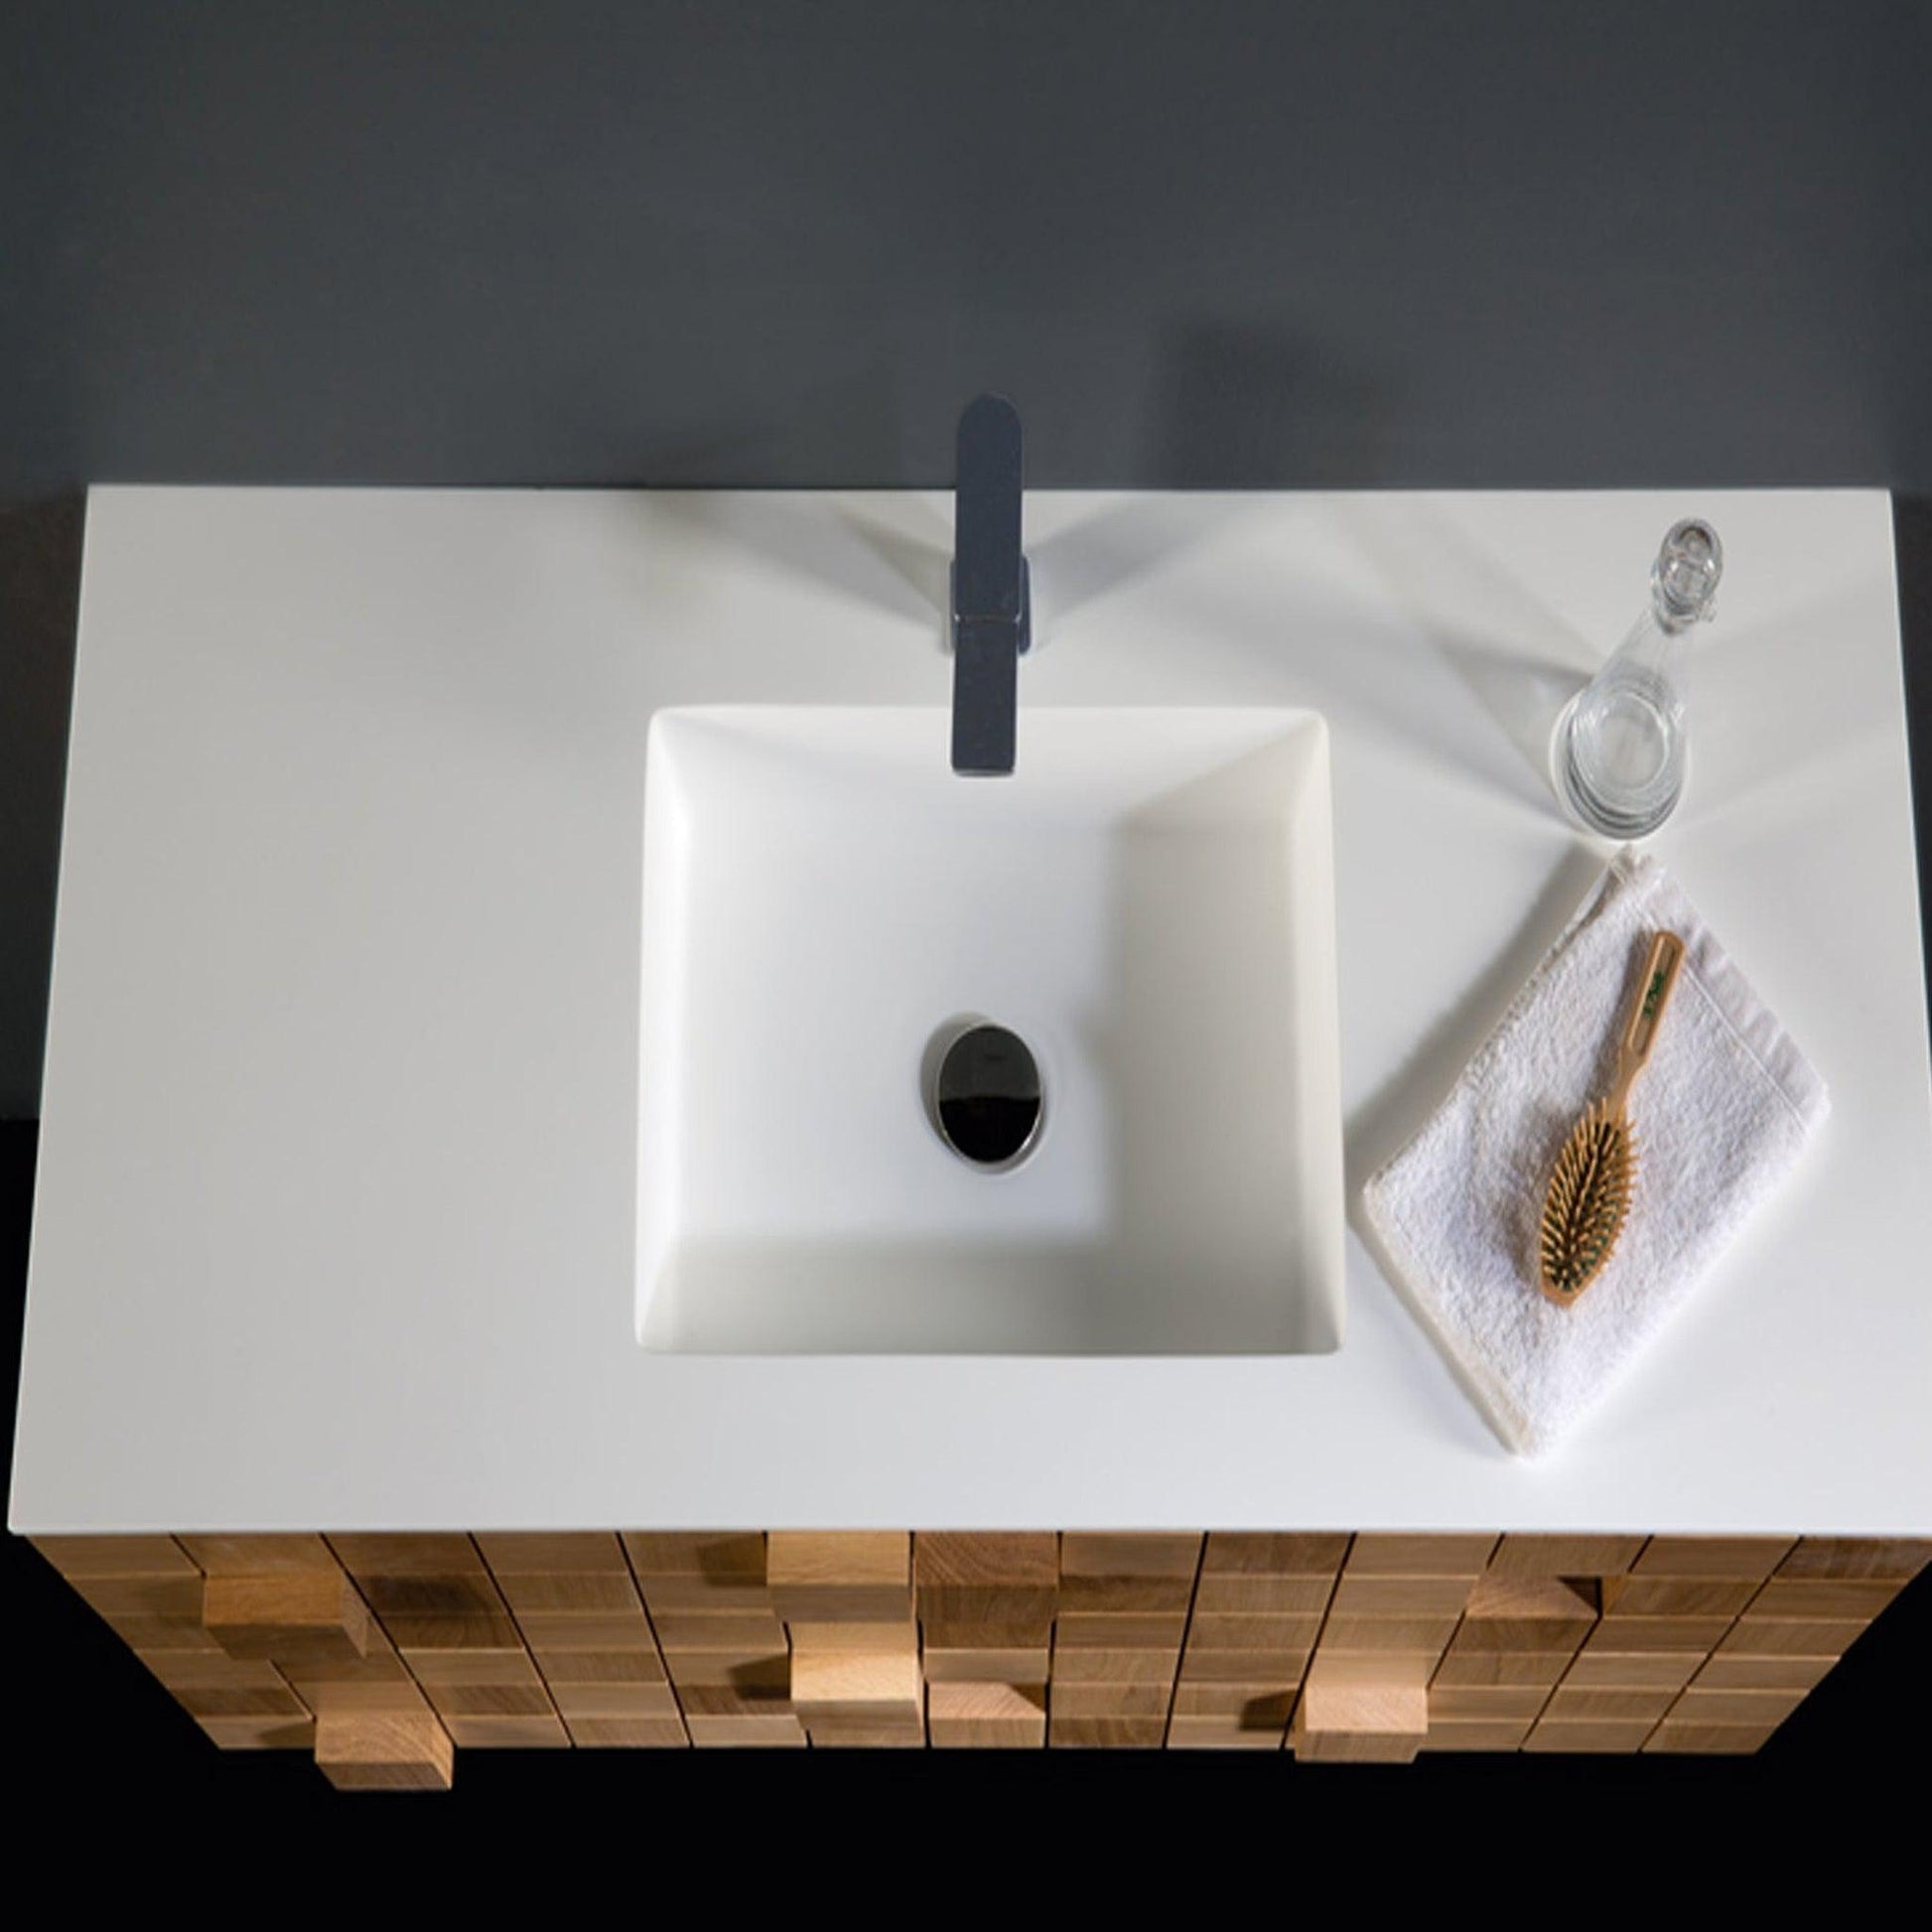 Eviva Mosaic 33" x 20" Oak Wall-Mounted Bathroom Vanity With White Integrated Solid Surface Countertop